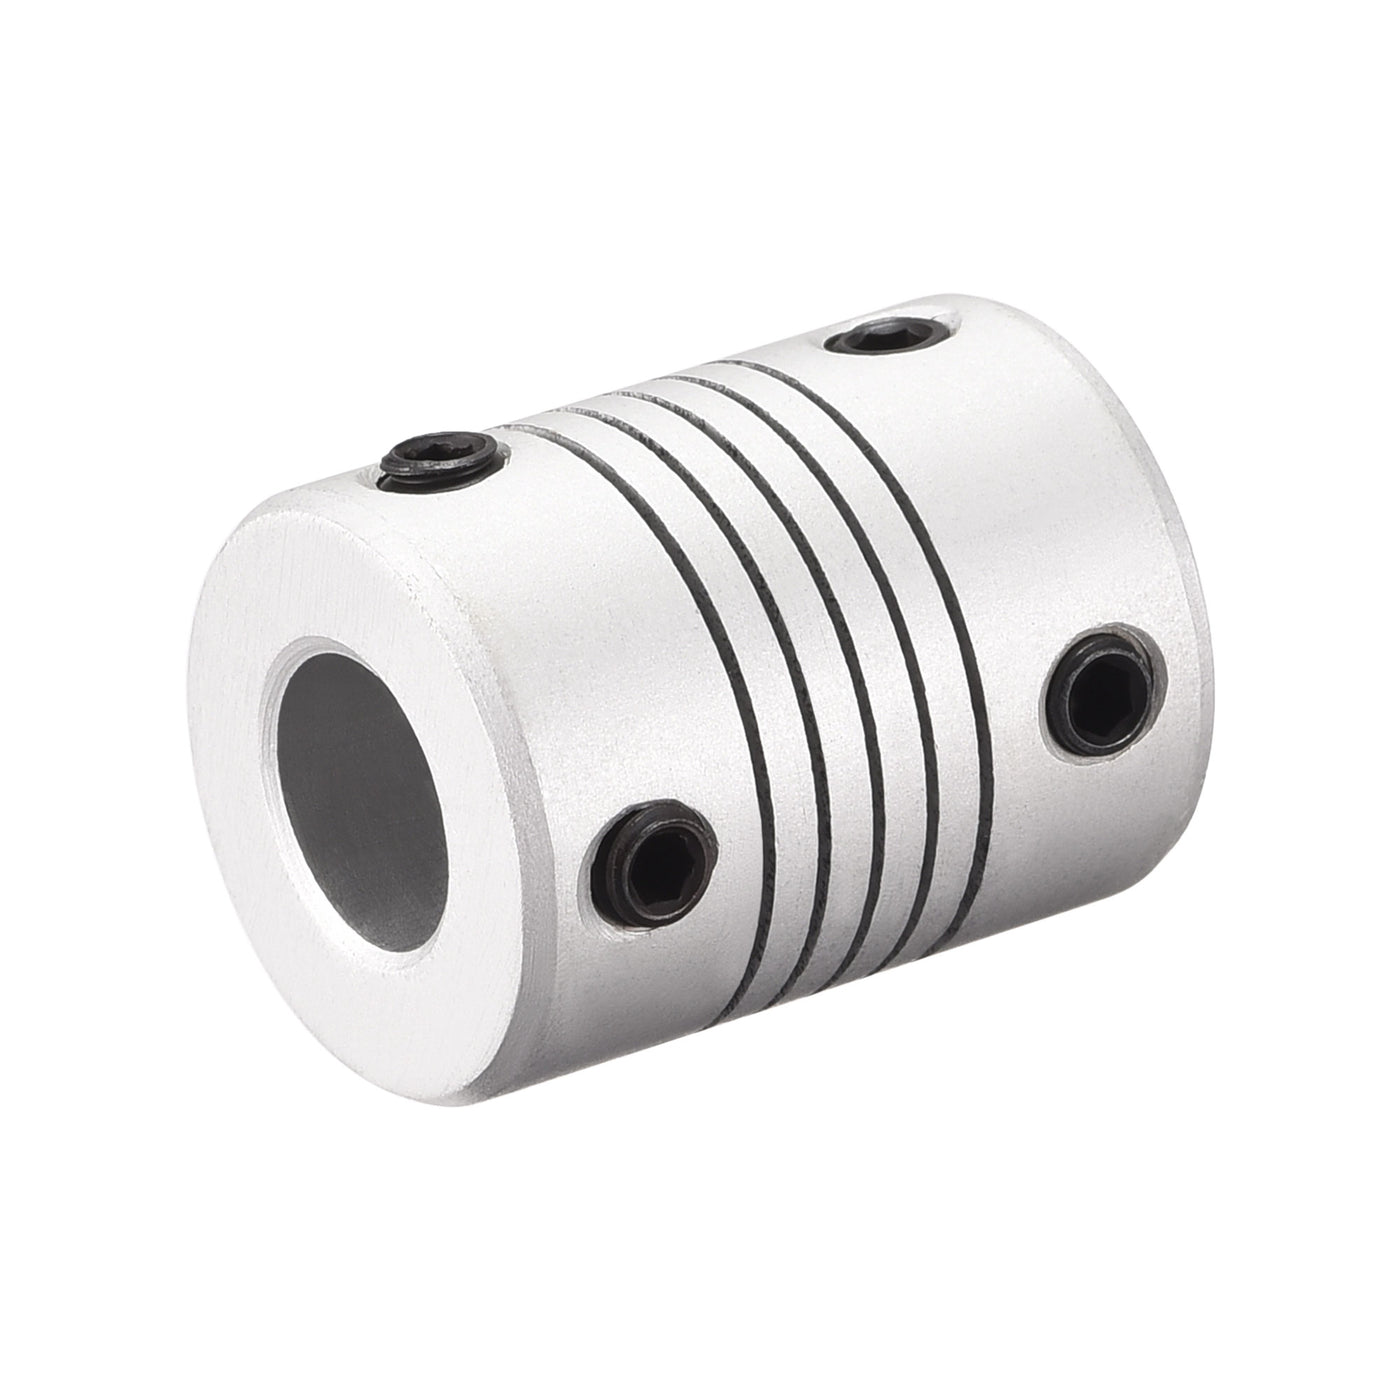 uxcell Uxcell 9mm to 9mm Aluminum Alloy Shaft Coupling Flexible Coupler L25xD19 Silver,5pcs